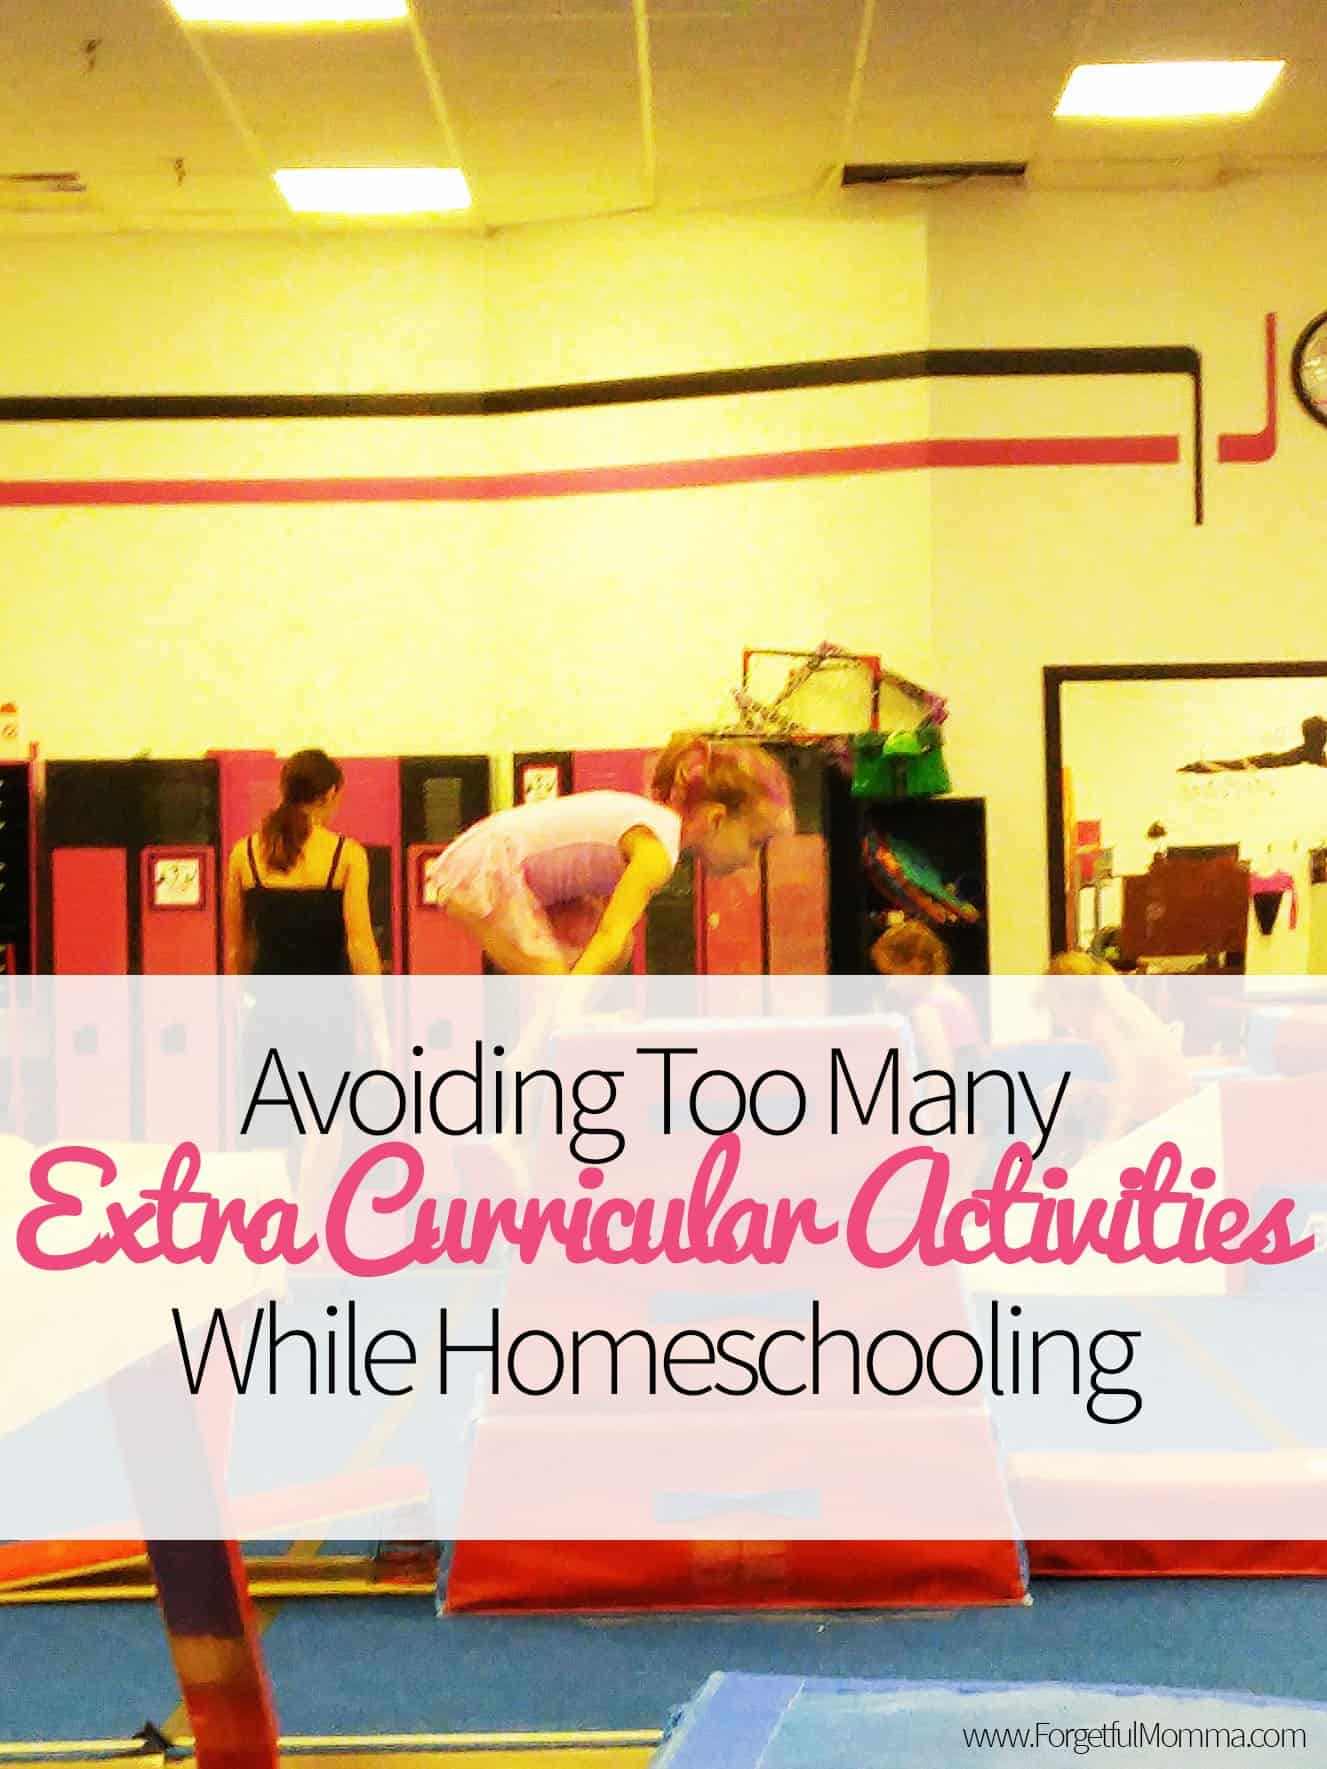 Avoiding Too Many Extra Curricular Activities While Homeschooling